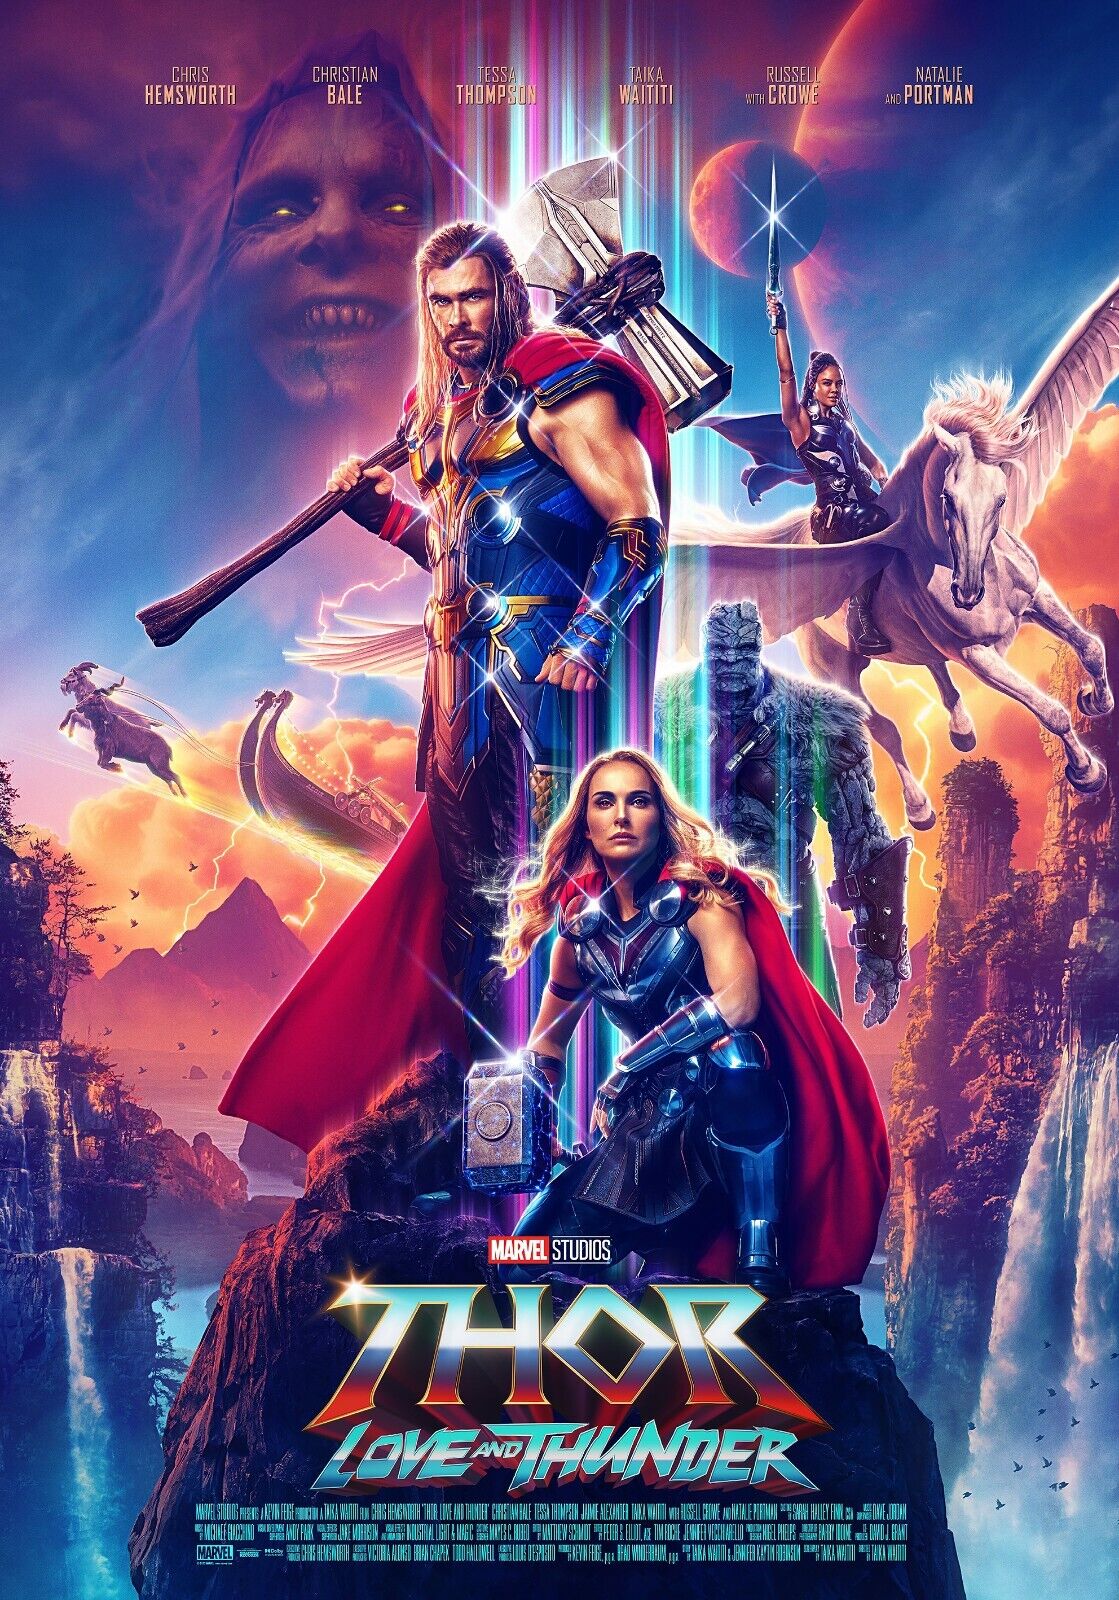 Thor - Love and Thunder